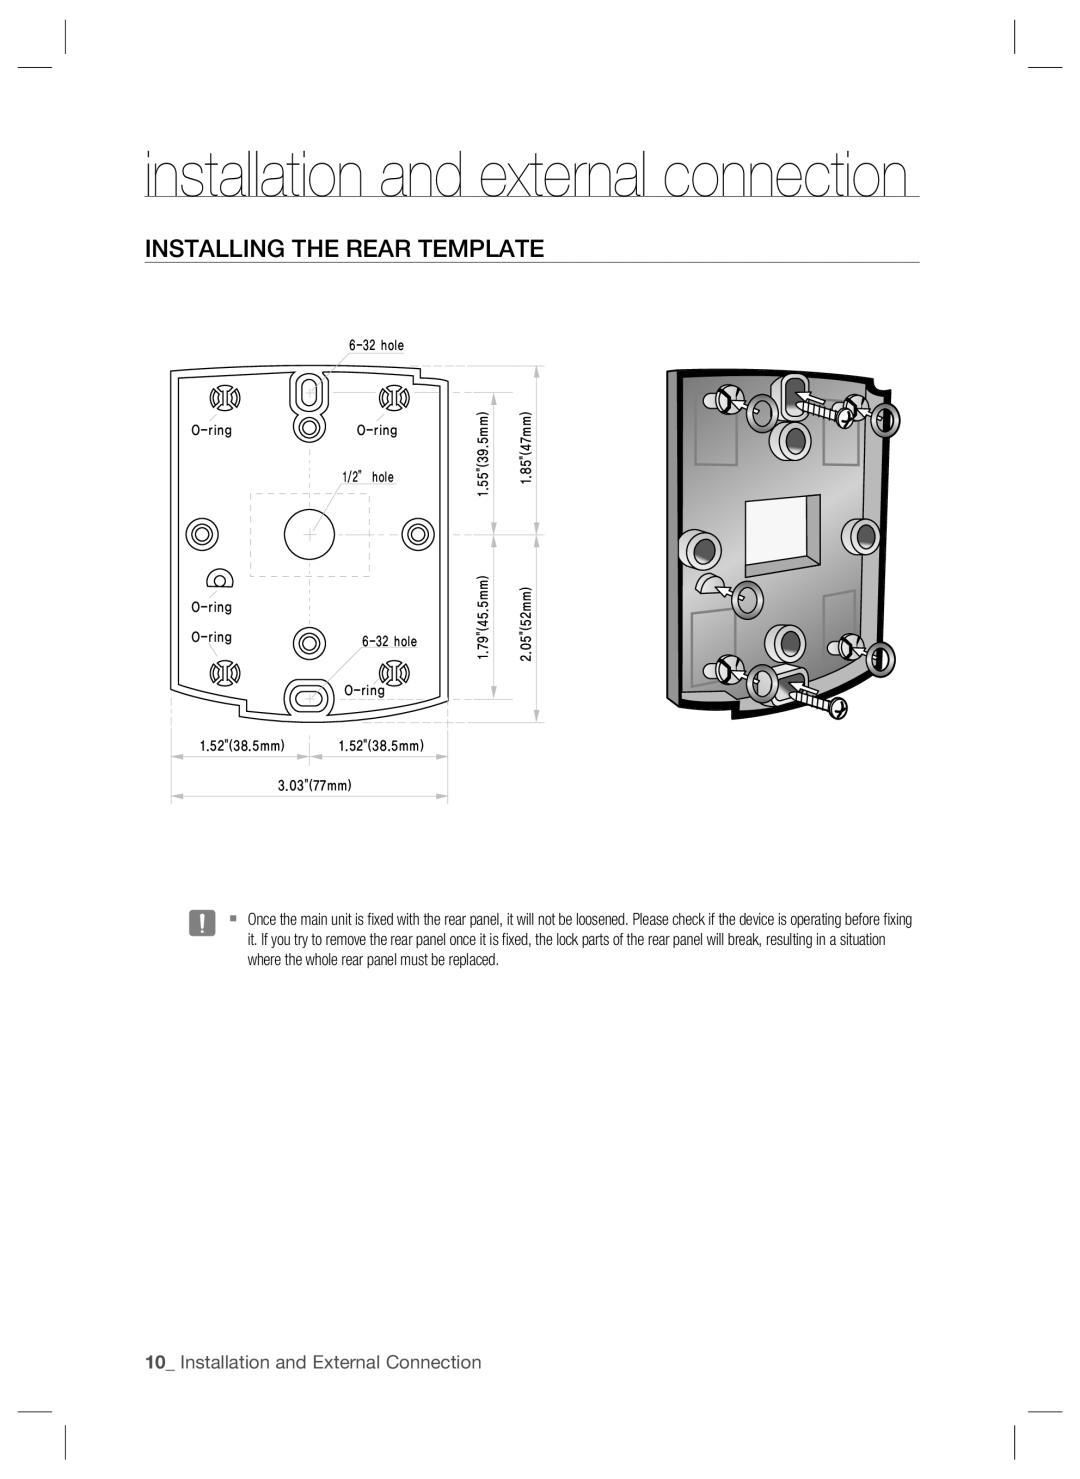 Samsung SSA-S2000W user manual 10_ Installation and External Connection, 6-32hole, O-ring, 1/2” hole, 3.0377mm 